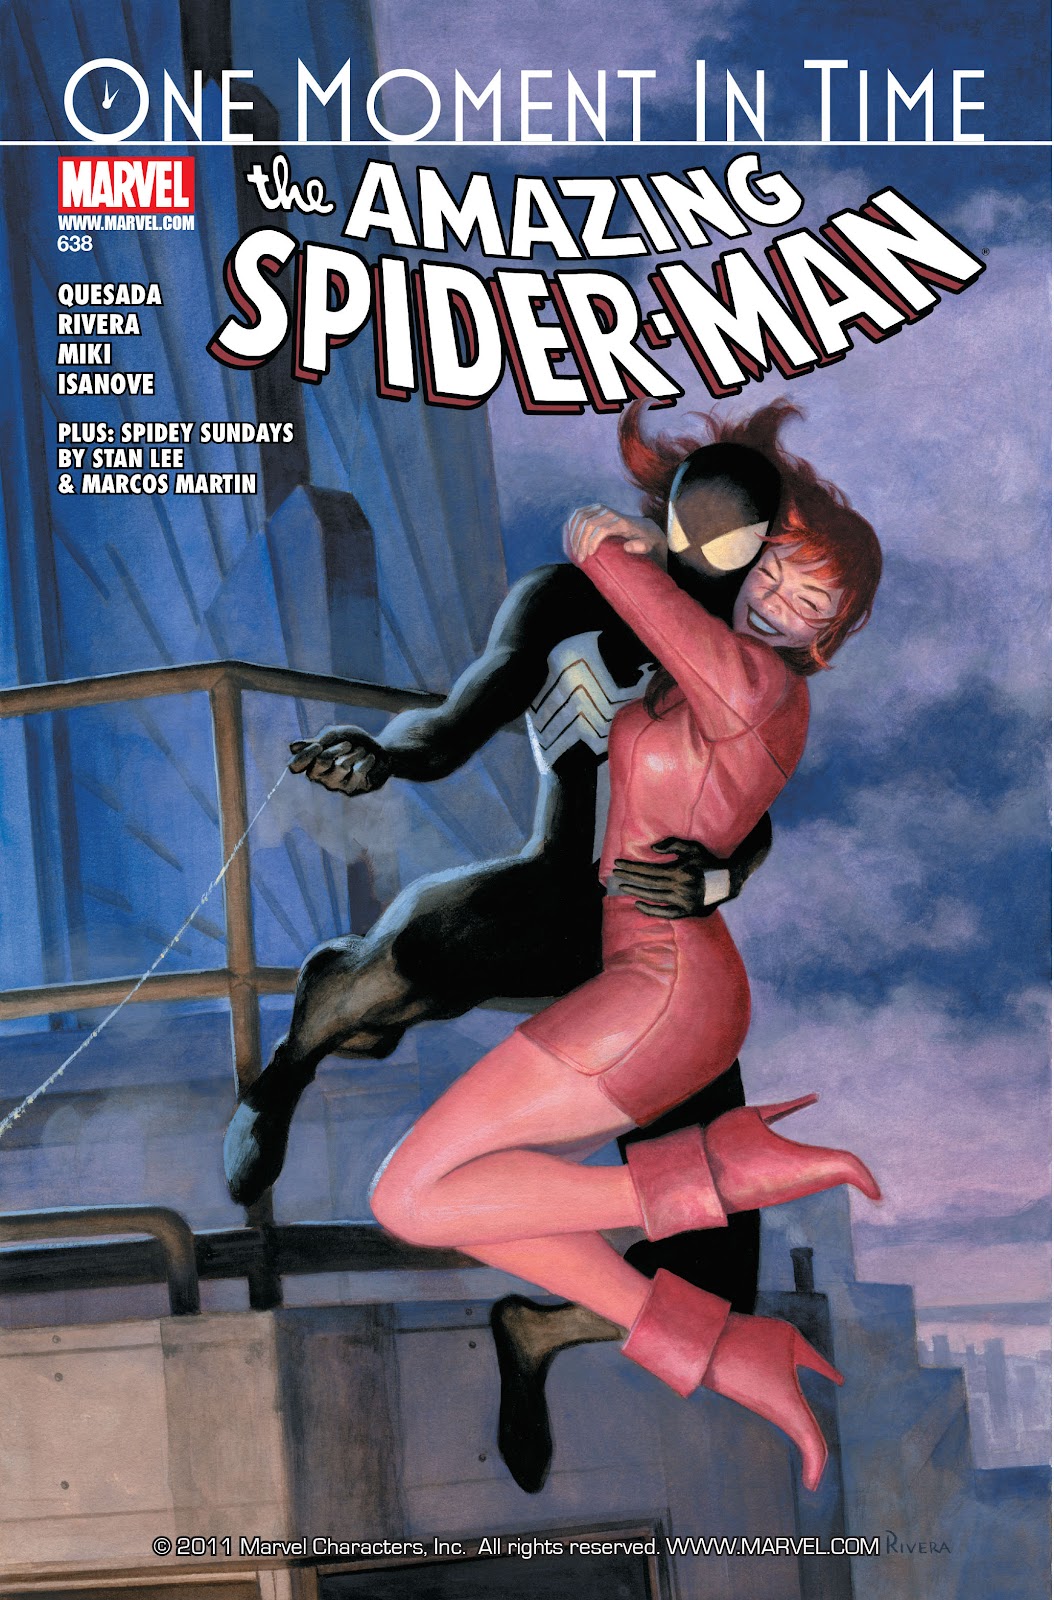 The Amazing Spider Man 1963 Issue 638 | Read The Amazing Spider Man 1963  Issue 638 comic online in high quality. Read Full Comic online for free -  Read comics online in high quality .